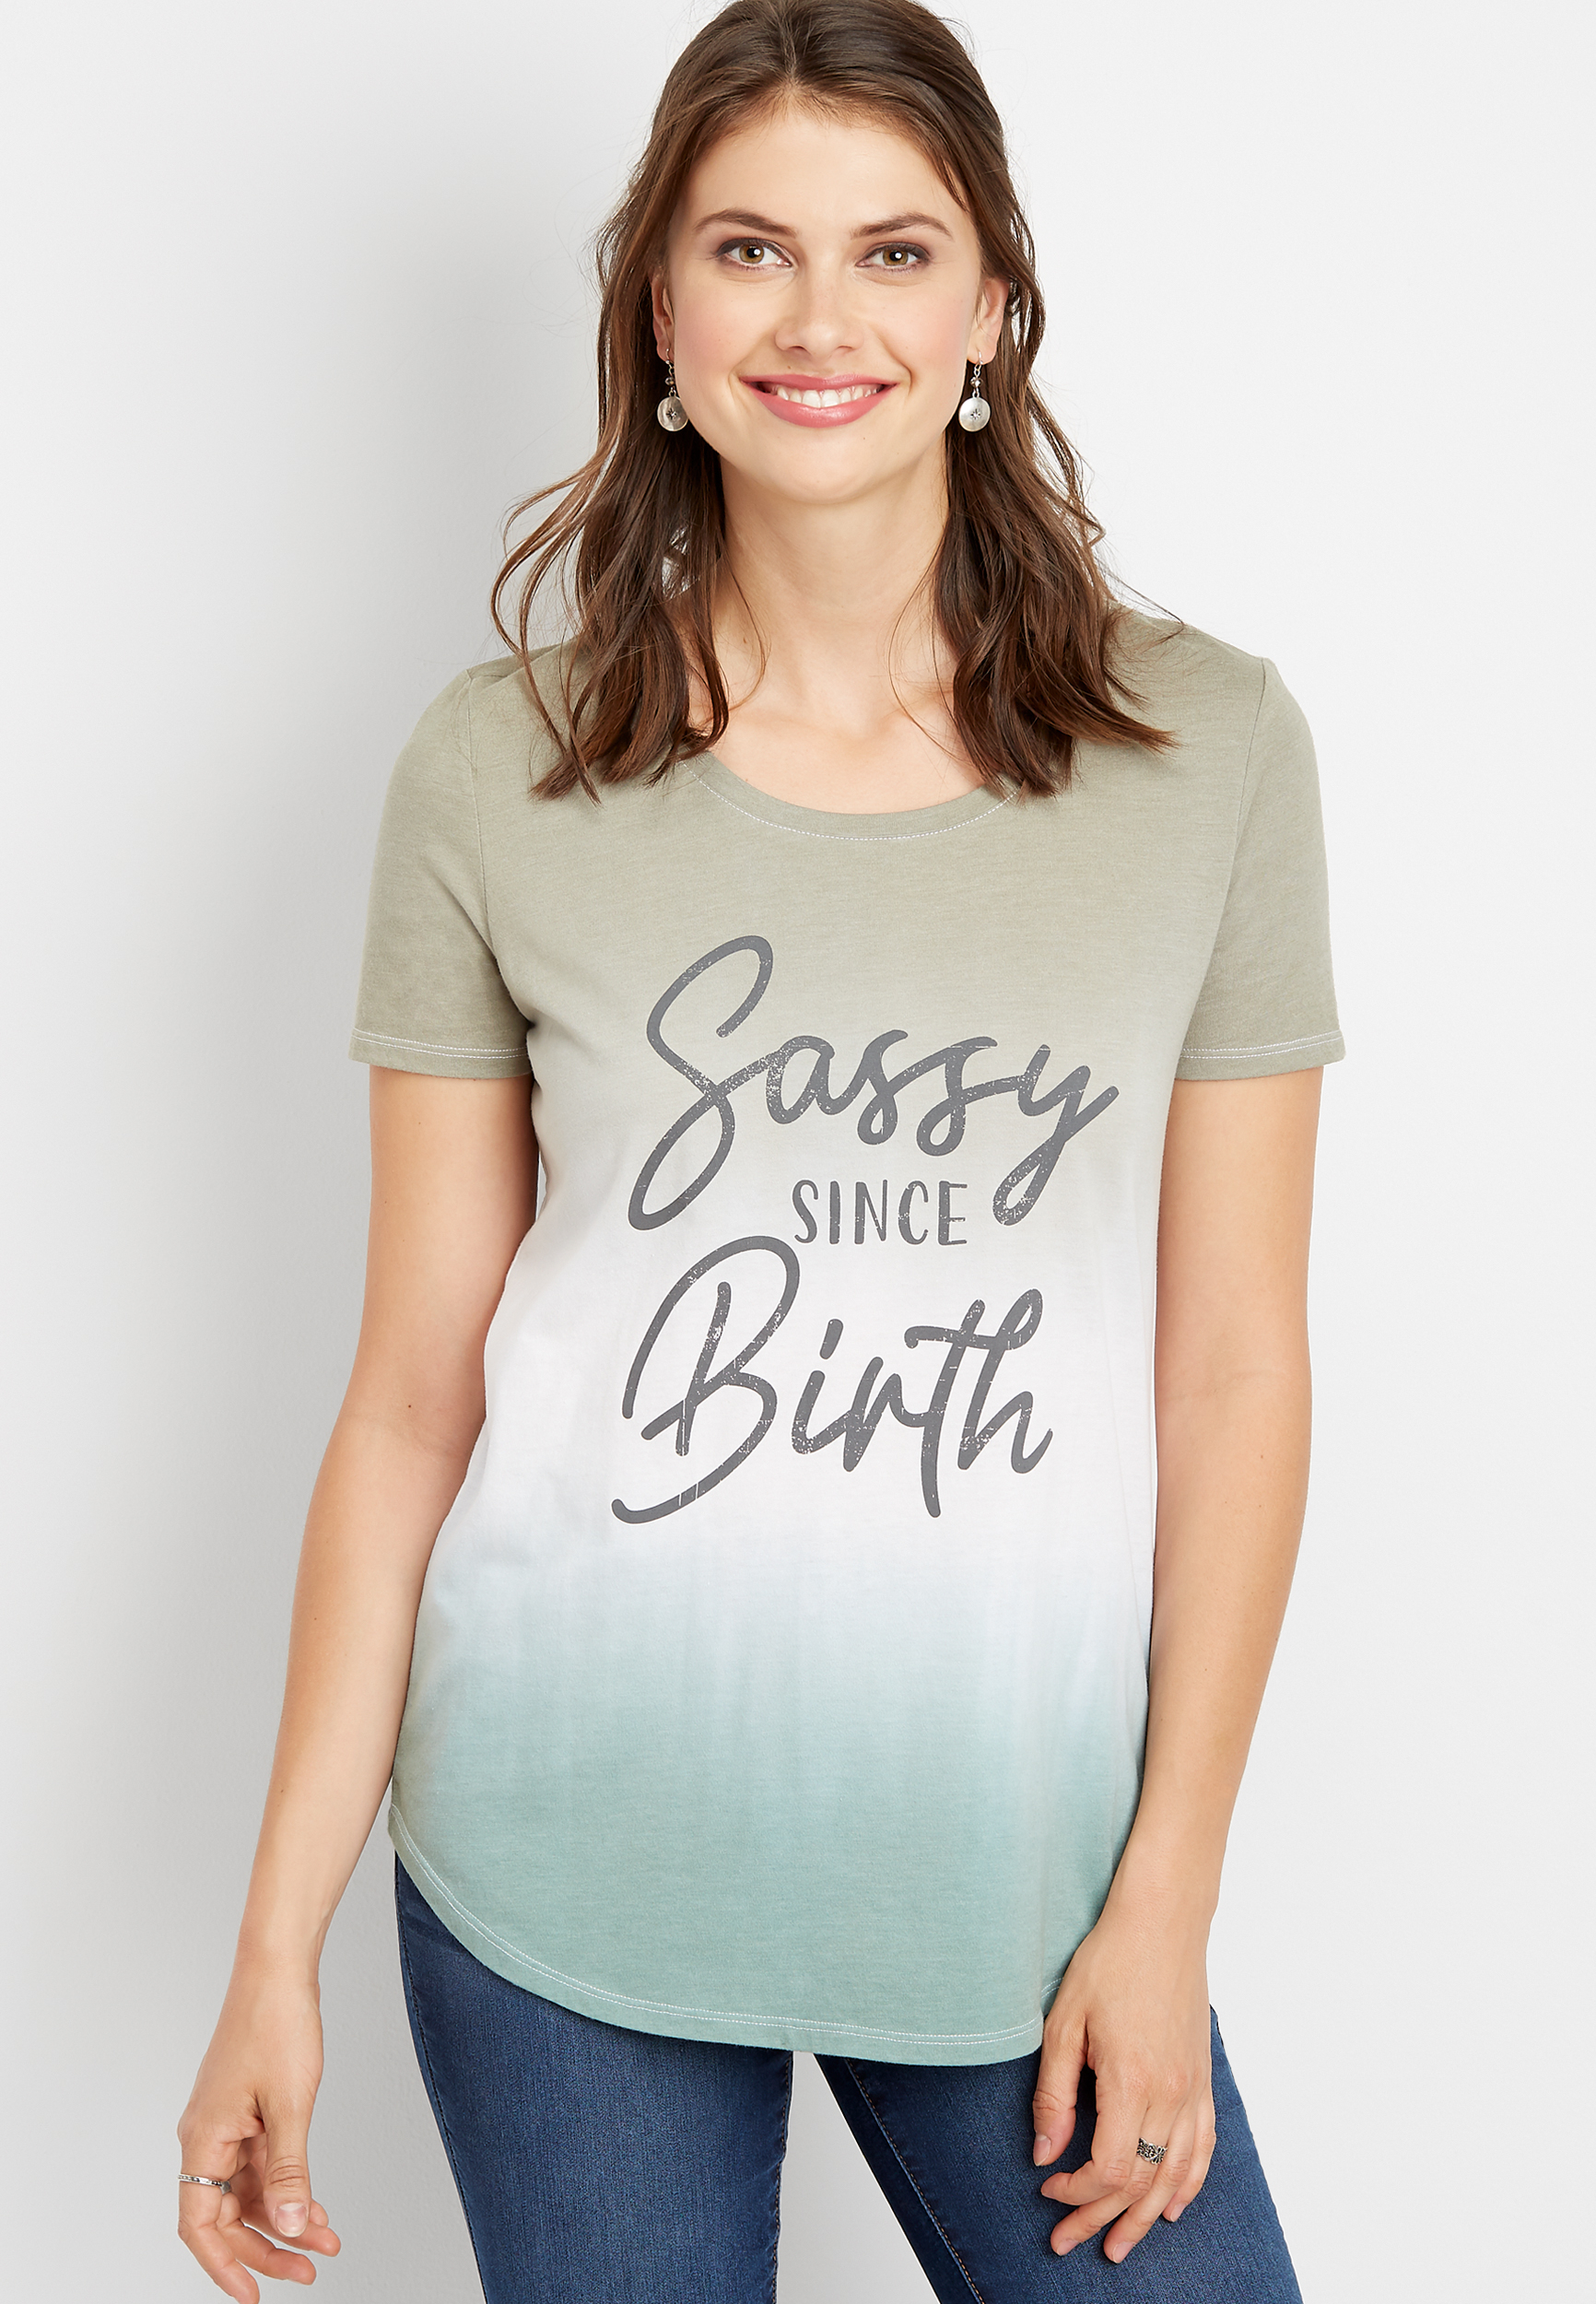 sassy since birth graphic tee | maurices